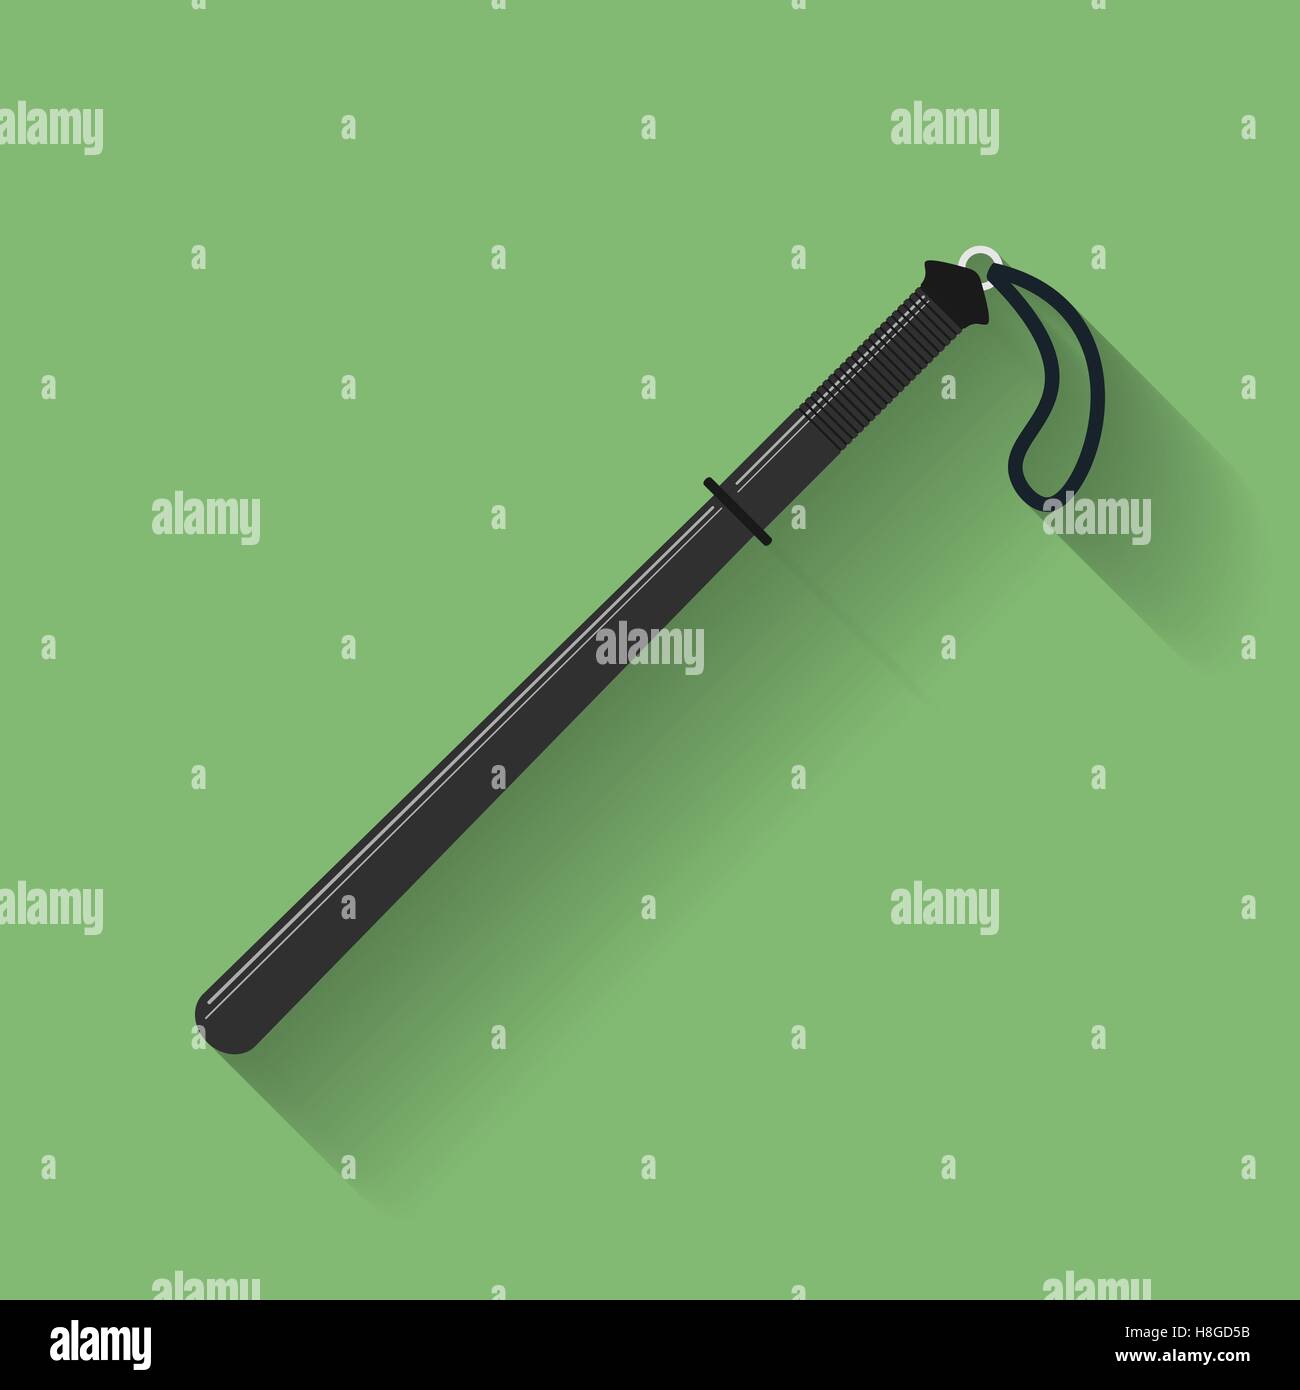 Icon of Police baton or police nightstick. Flat style Stock Vector